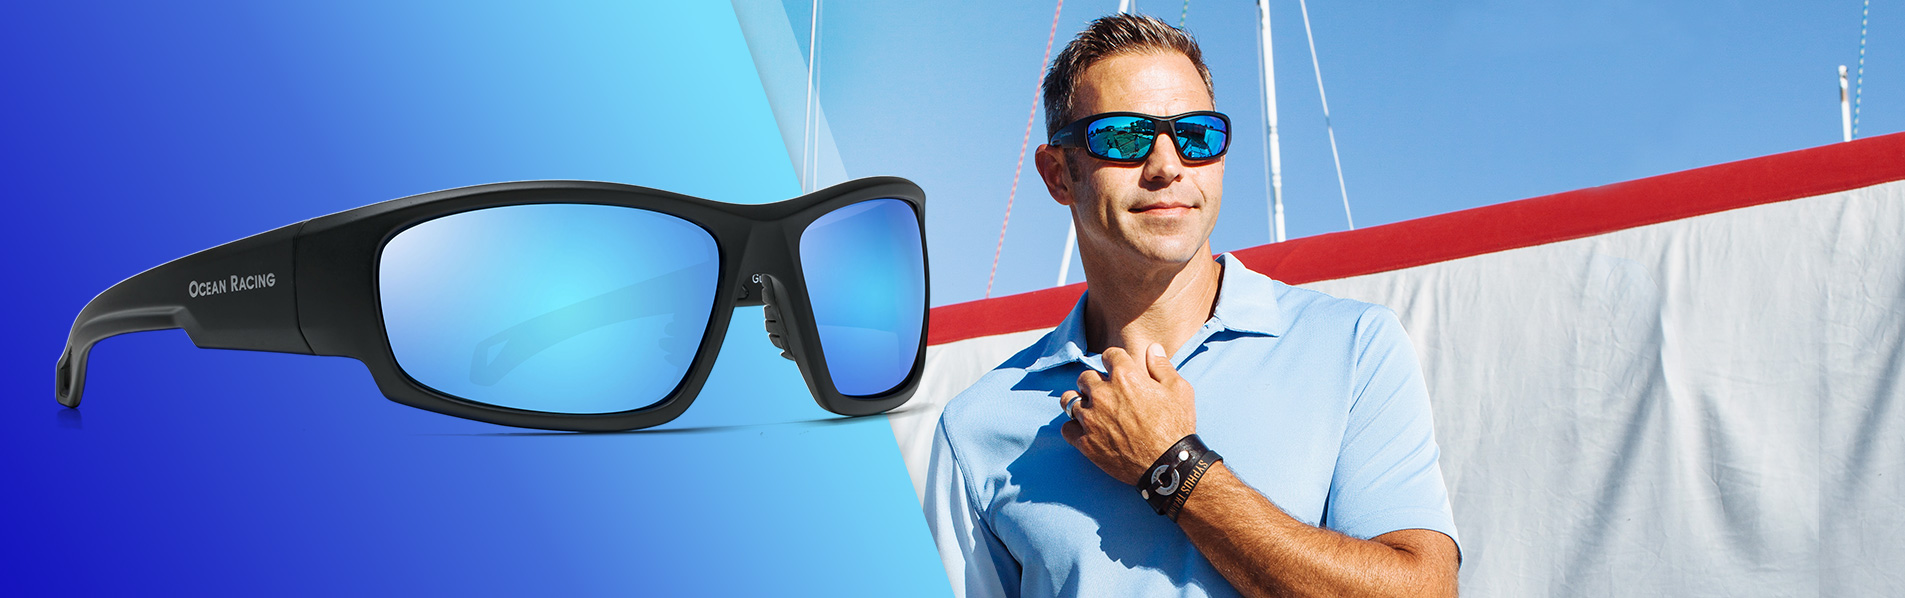 Ocean Racing - Quality Sunglasses At A 